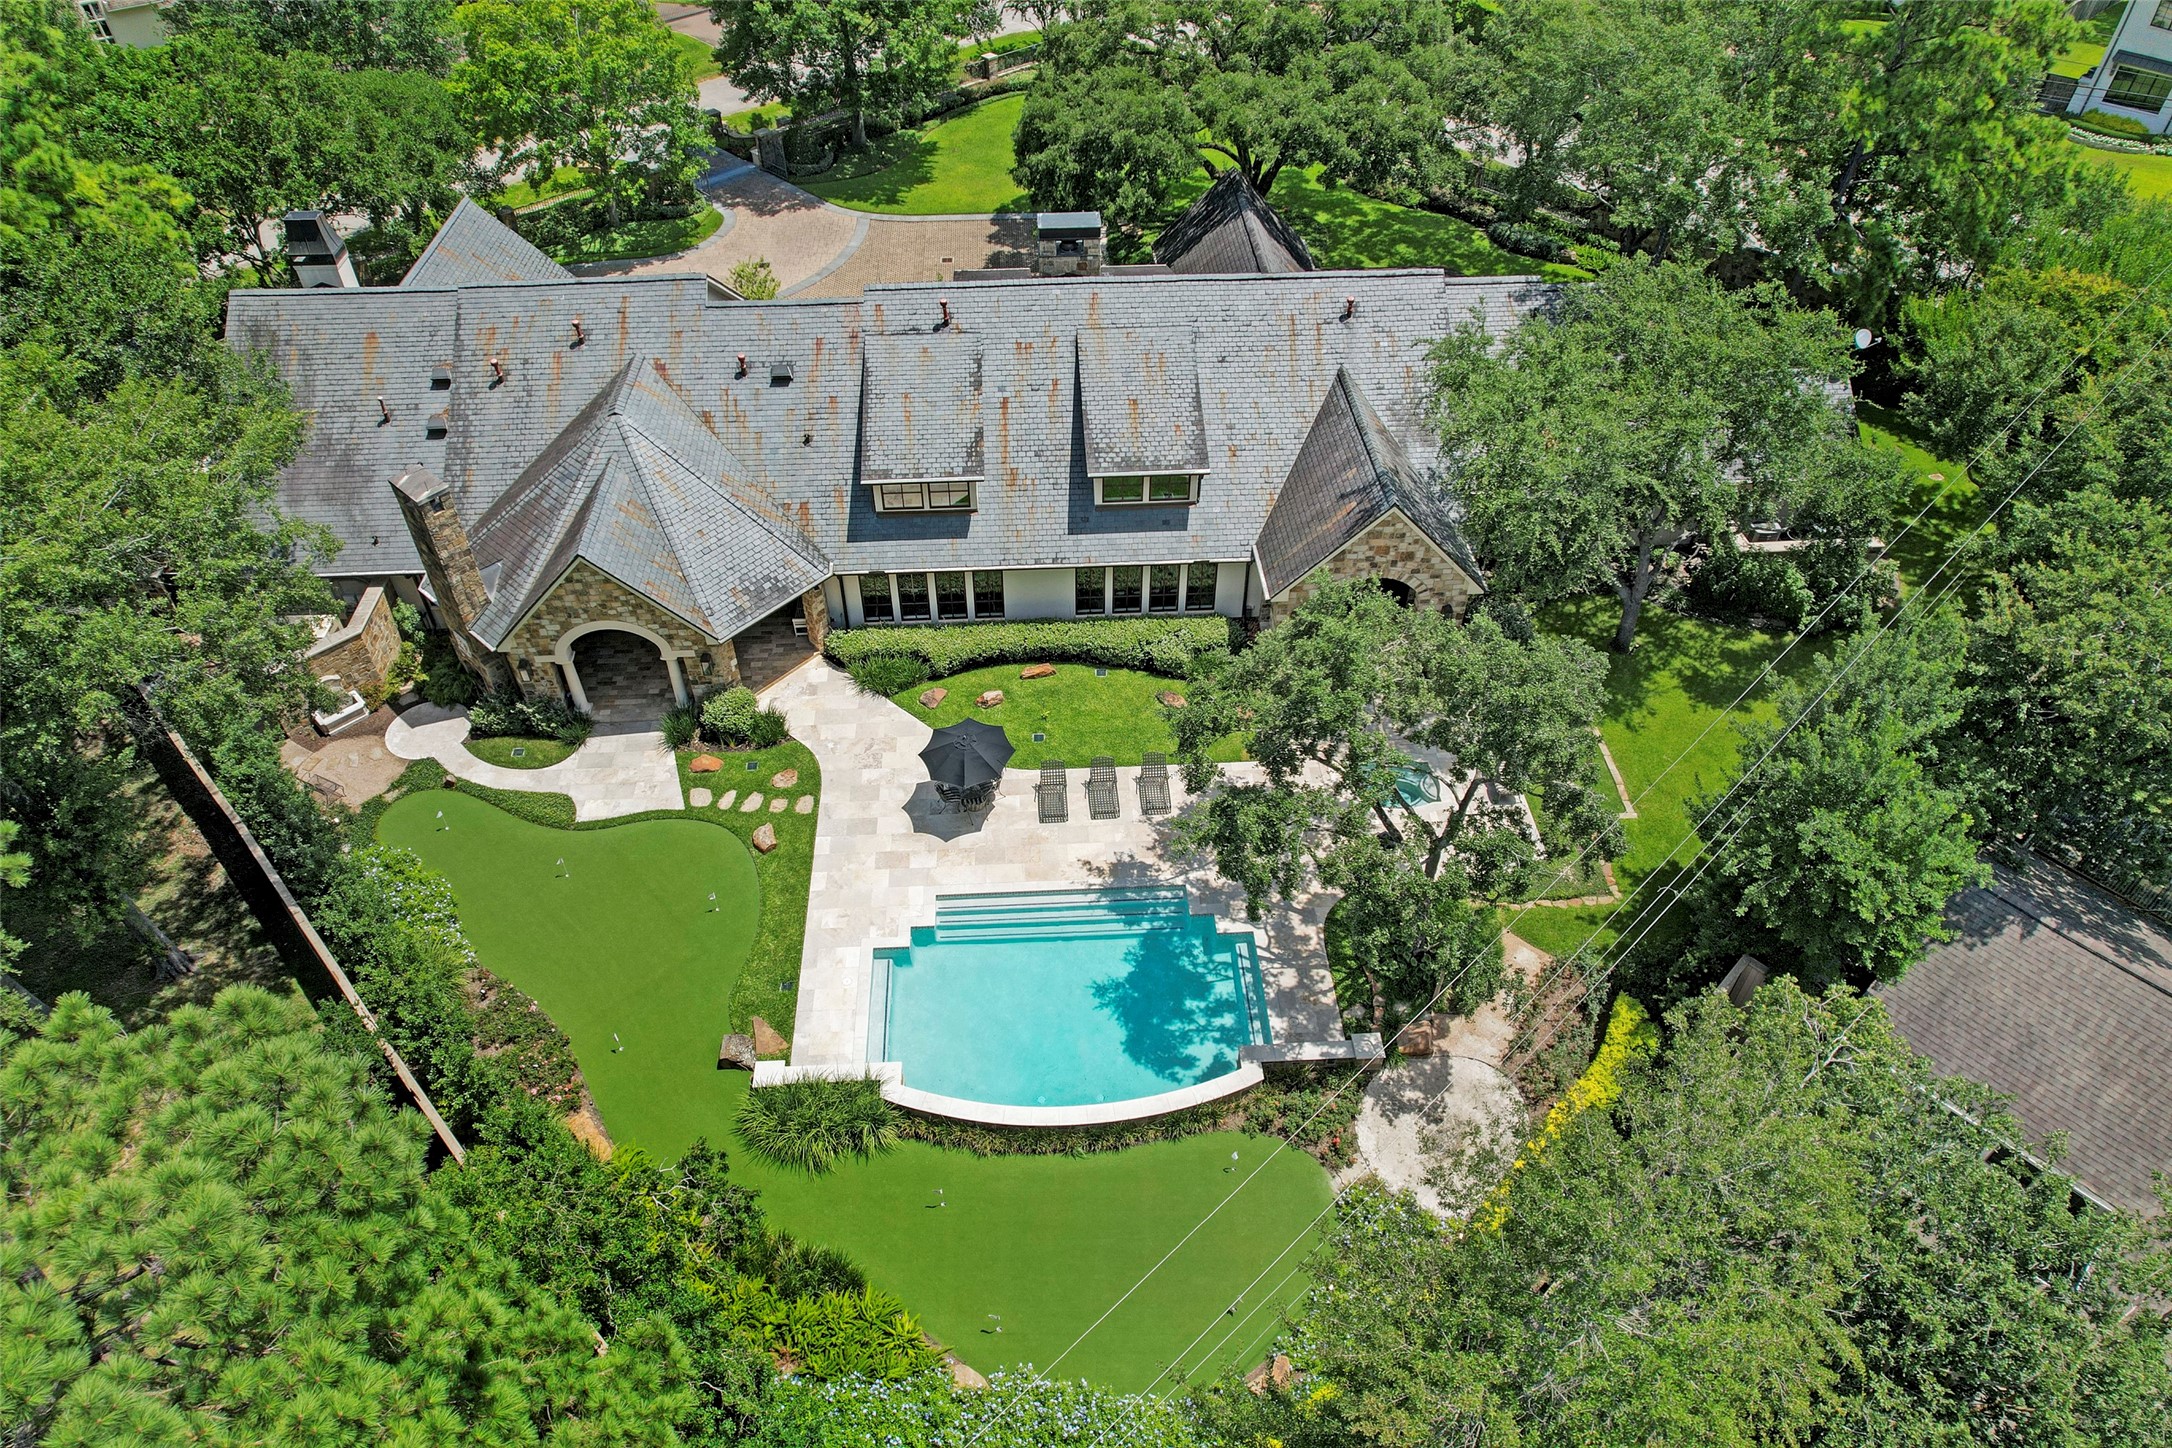 This sprawling home and huge lot are stunning from every angle.